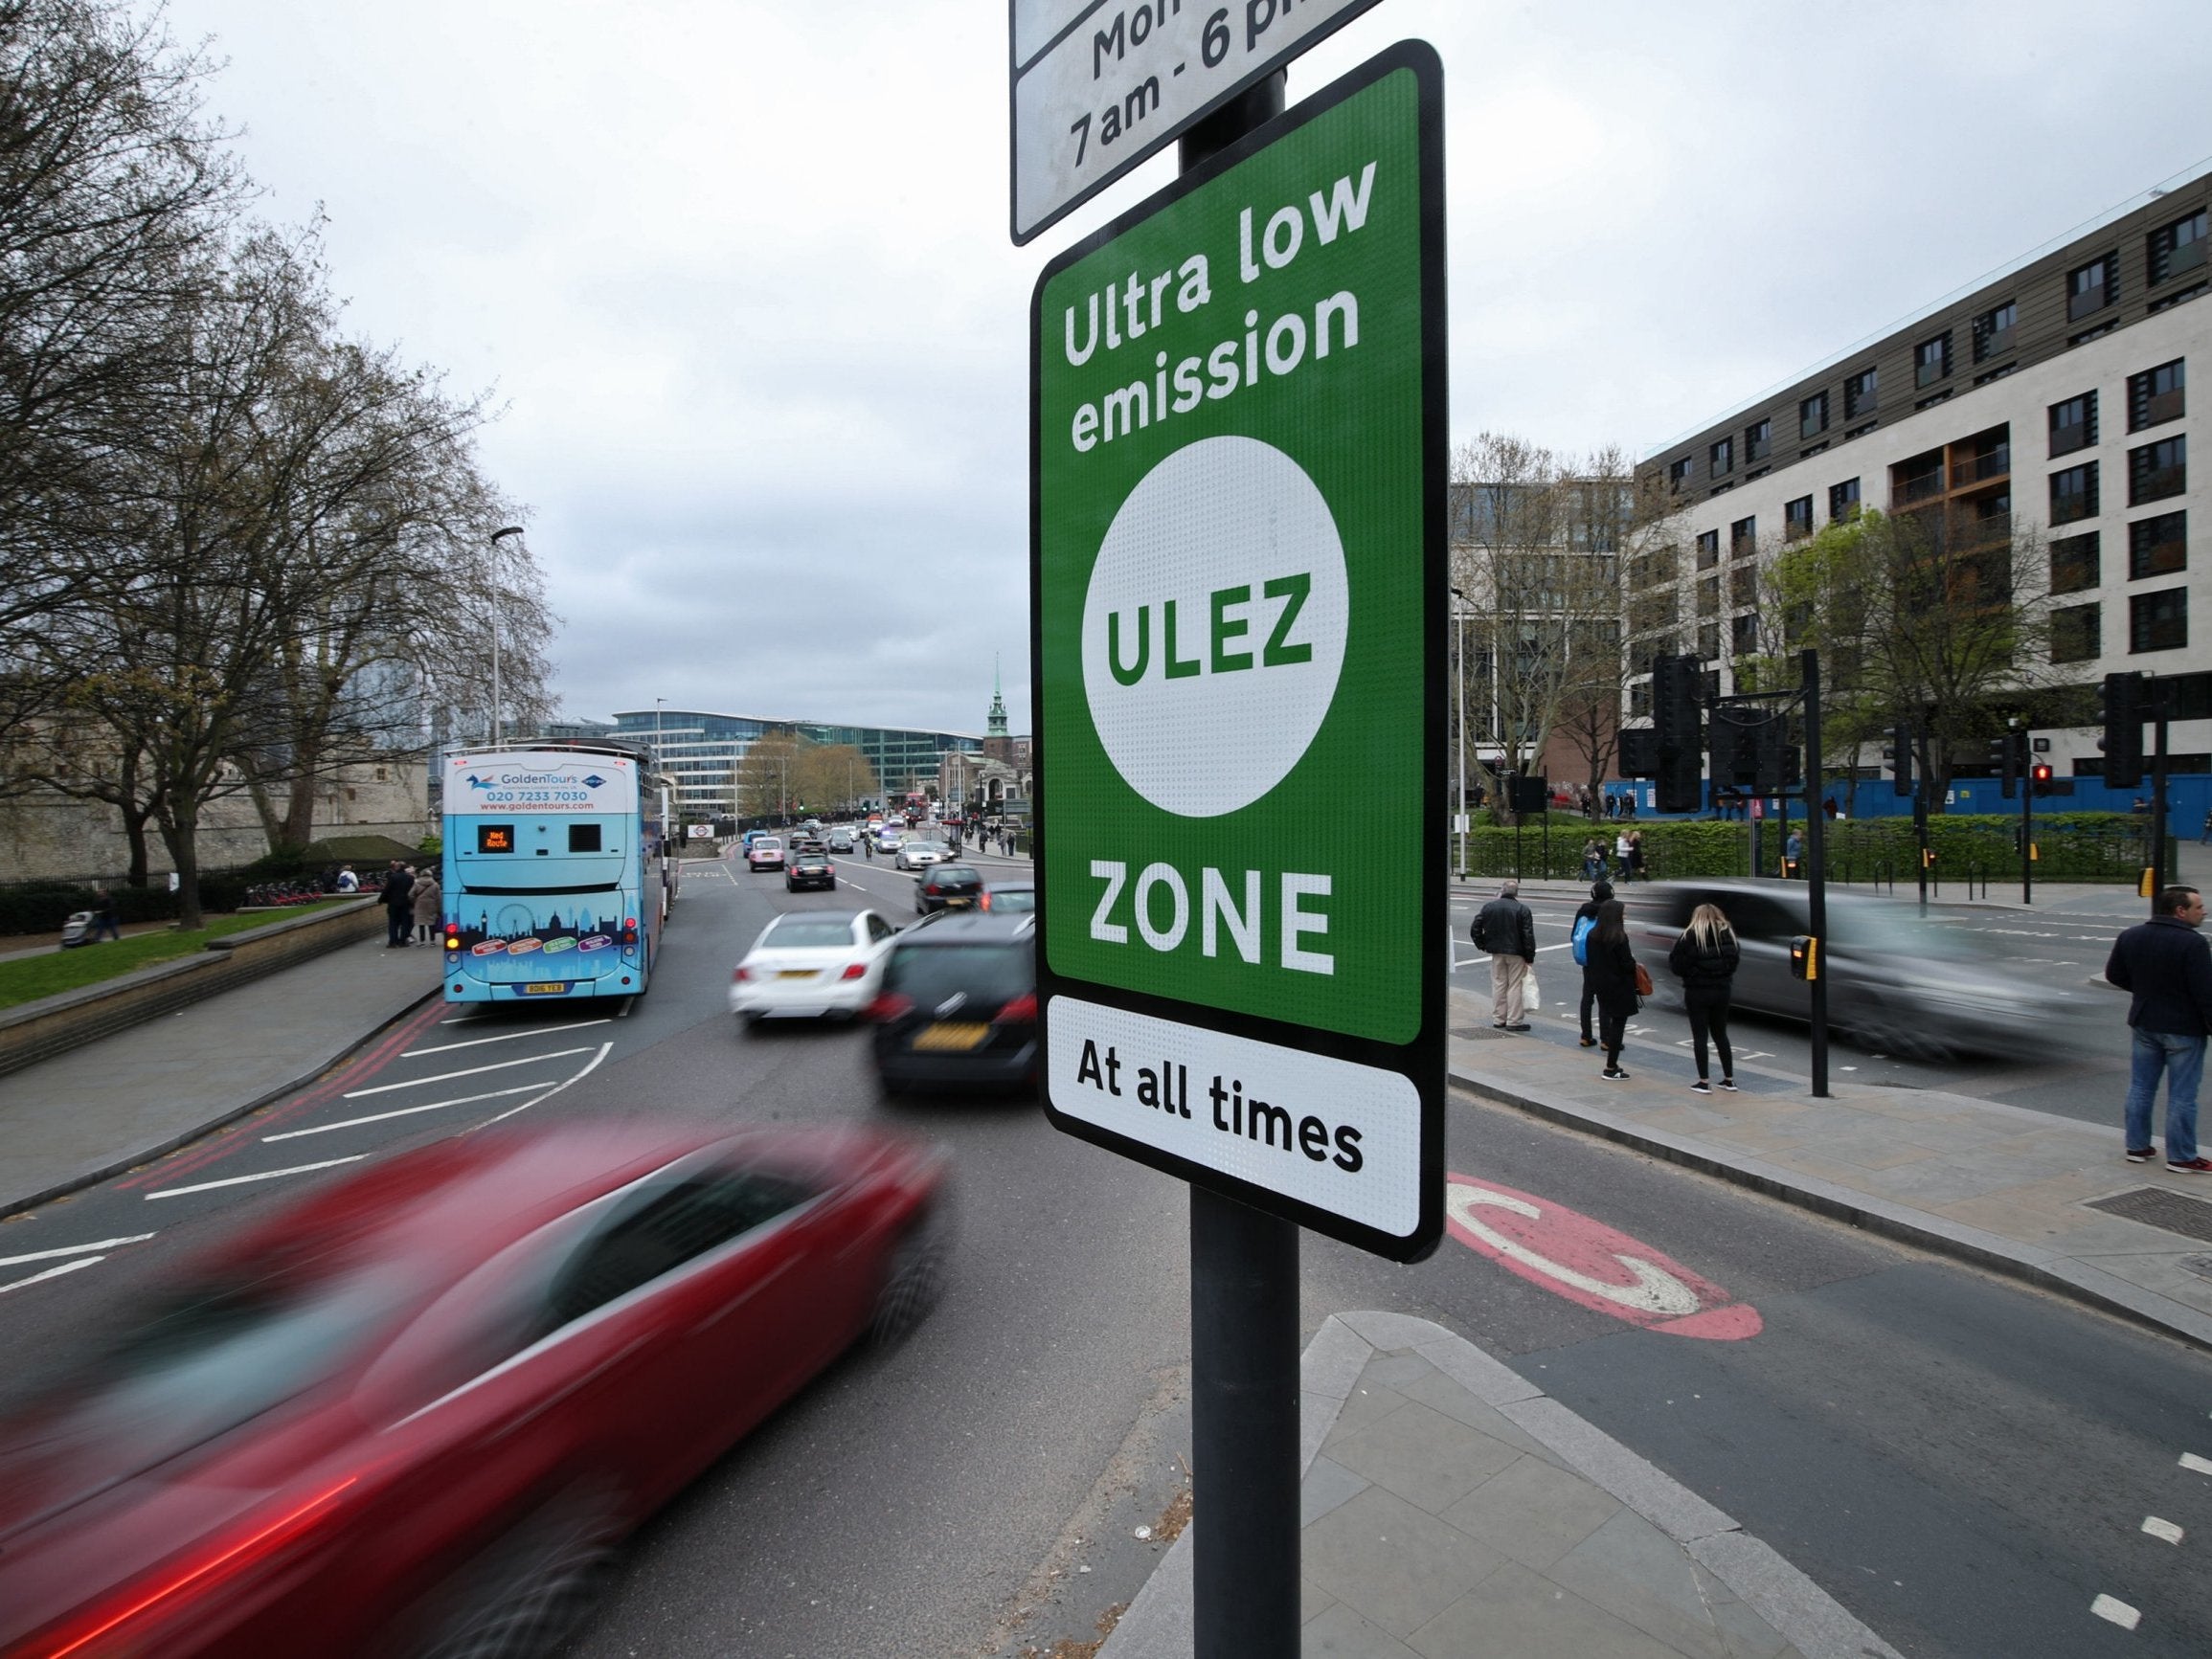 London's Ultra Low Emission Zone was introduced on 8 April